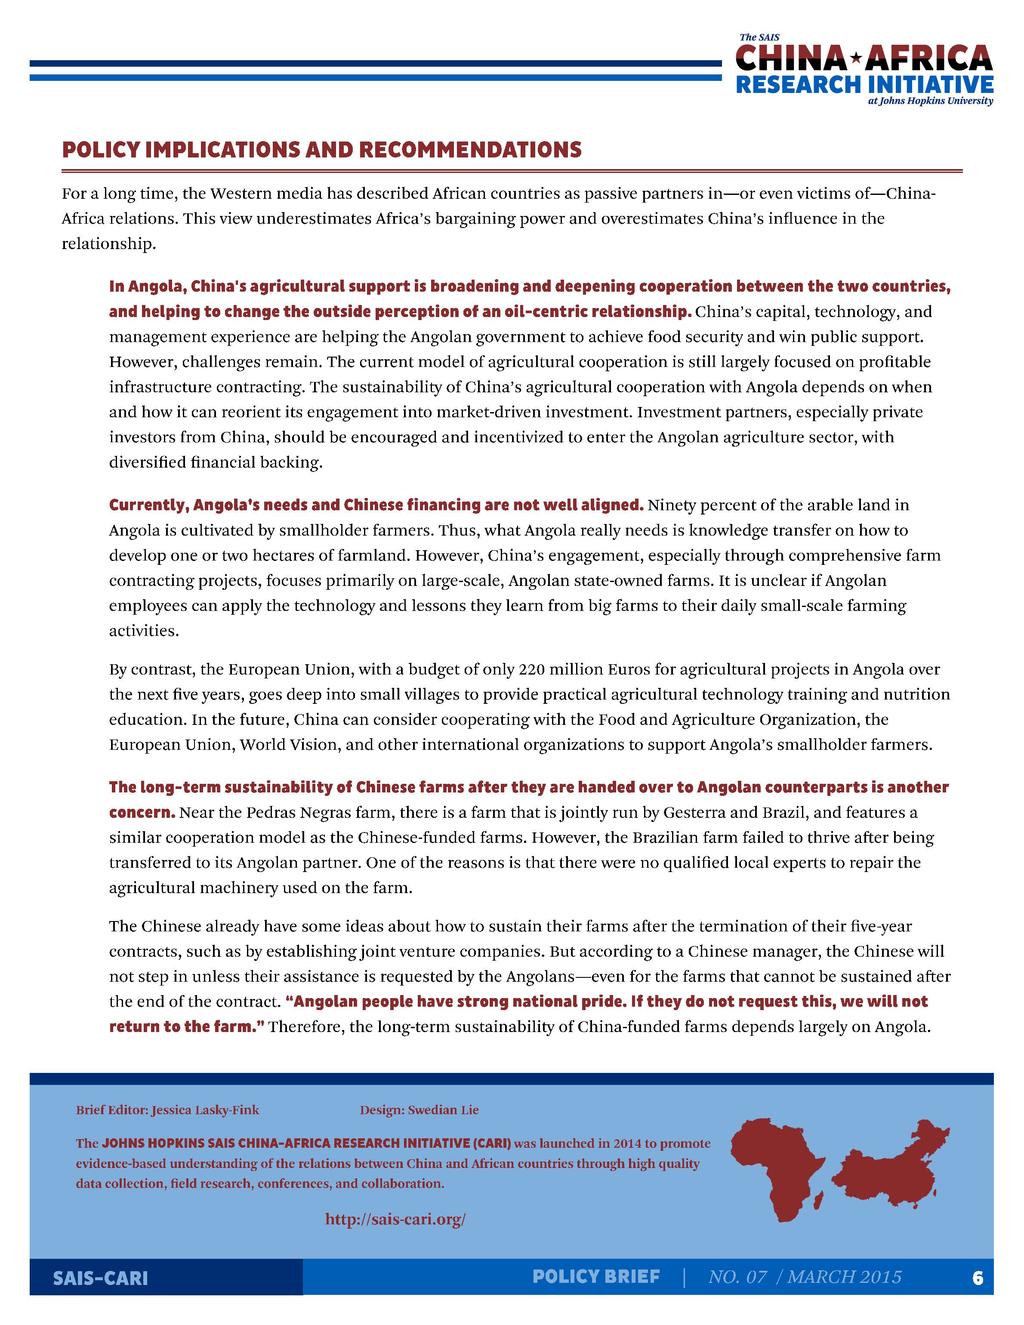 POLICY IMPLICATIONS AND RECOMMENDATIONS For a long time, the Western media has described African countries as passive partners in-or even victims of-china Africa relations.